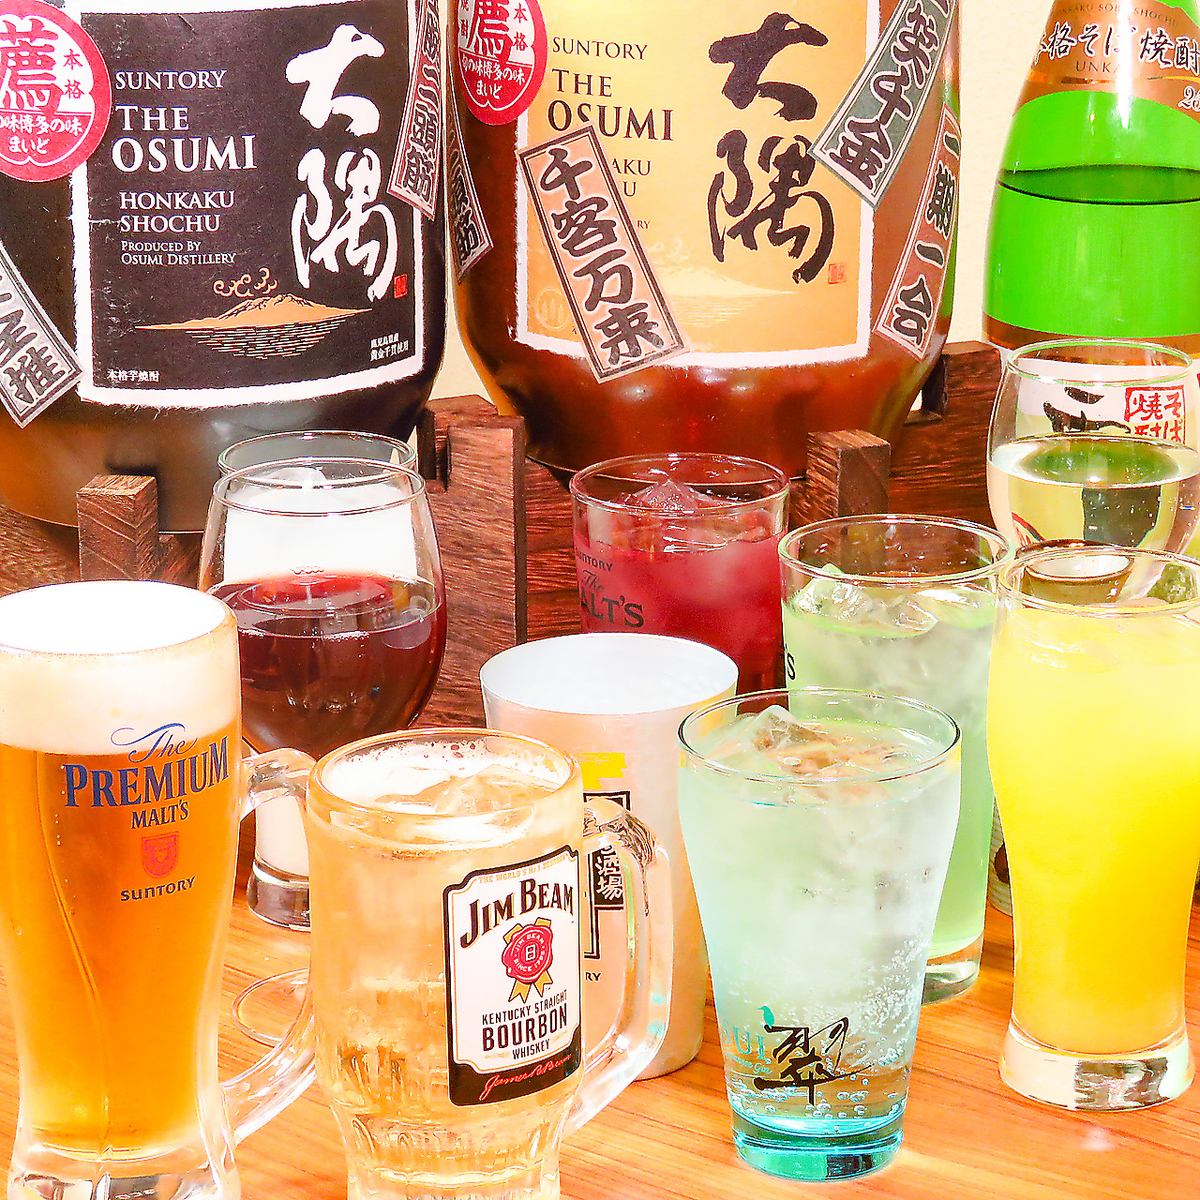 [90 minutes all-you-can-drink] All-you-can-drink beer and highball for 1,870 yen!